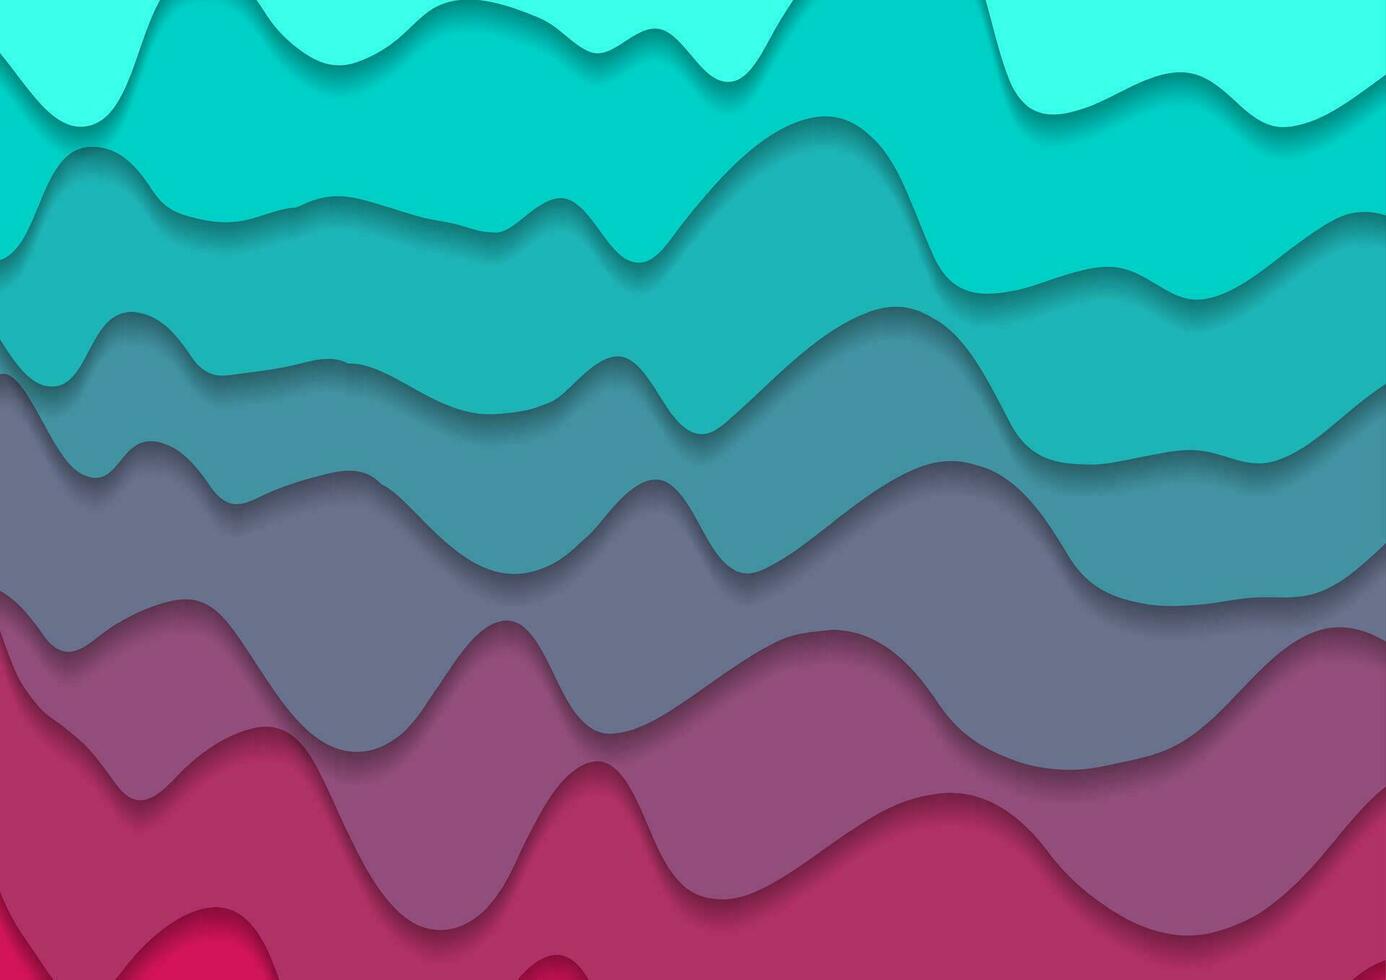 Turquoise and pink corporate waves abstract background vector